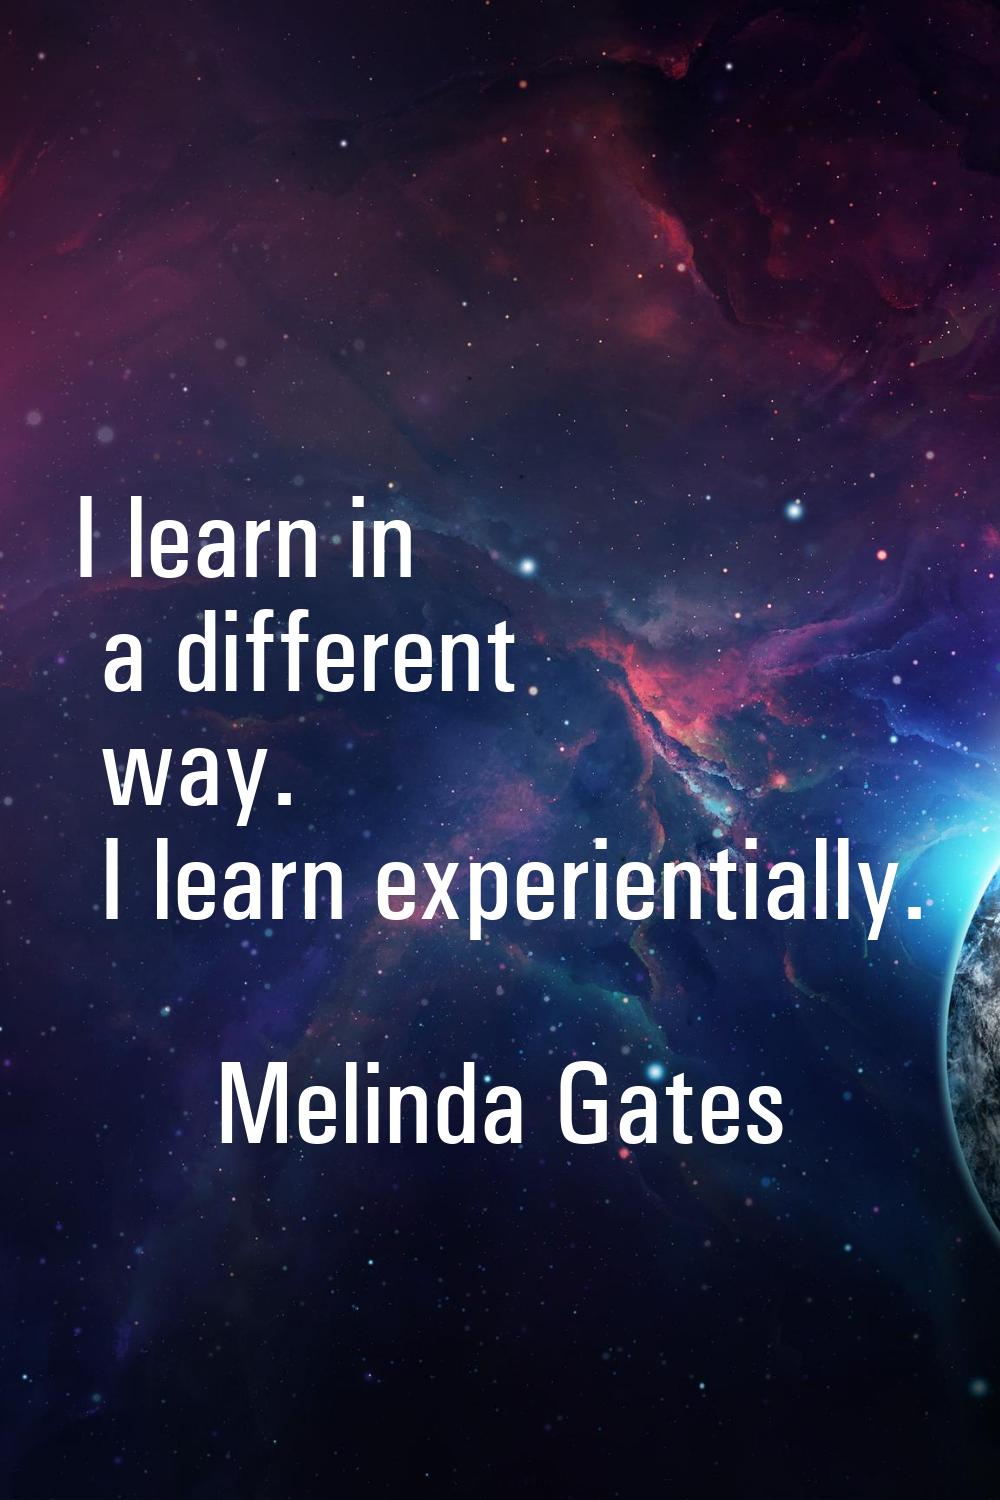 I learn in a different way. I learn experientially.